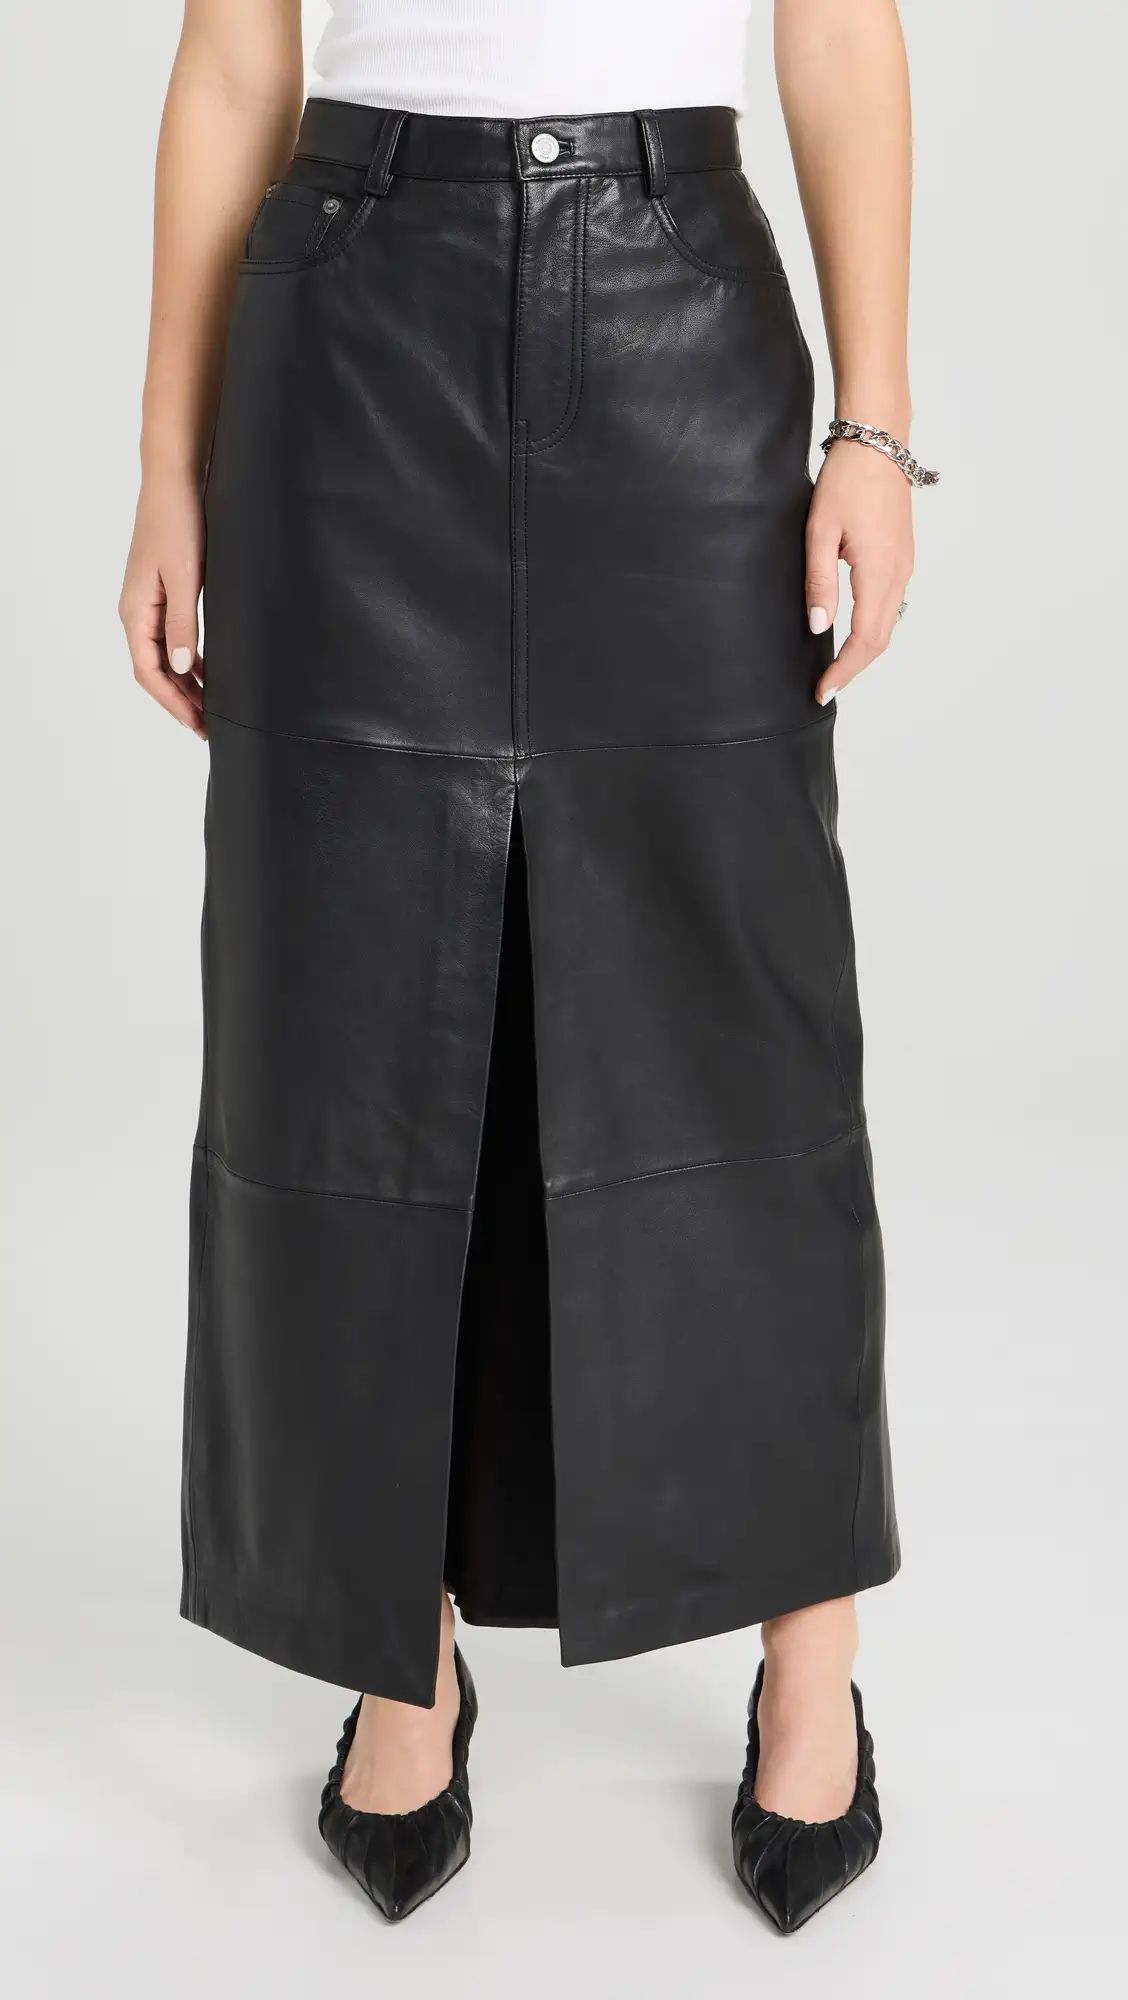 Reformation Veda Tazz Leather Maxi Skirt | Shopbop | Shopbop